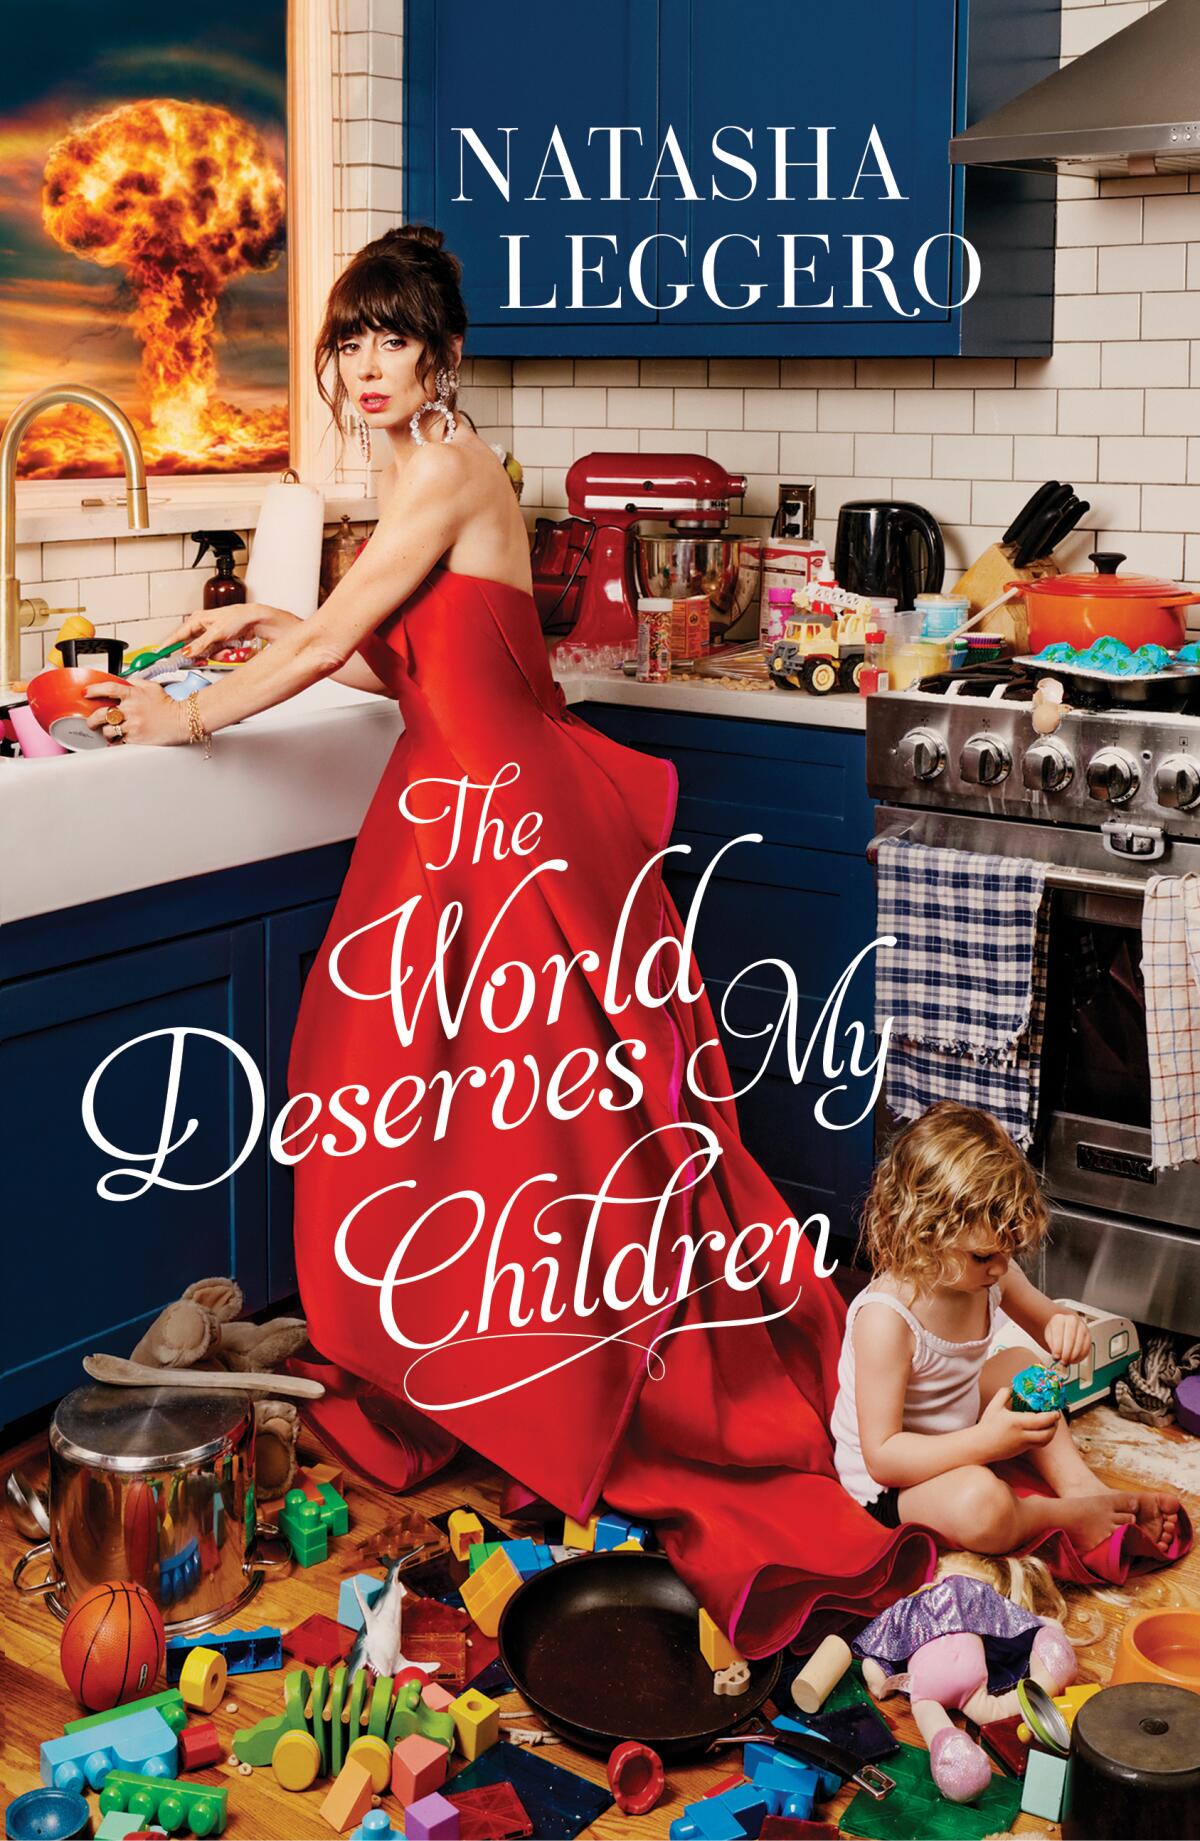 Book cover for "The World Deserves My Children" has a woman in a red gown cleaning a crowded kitchen